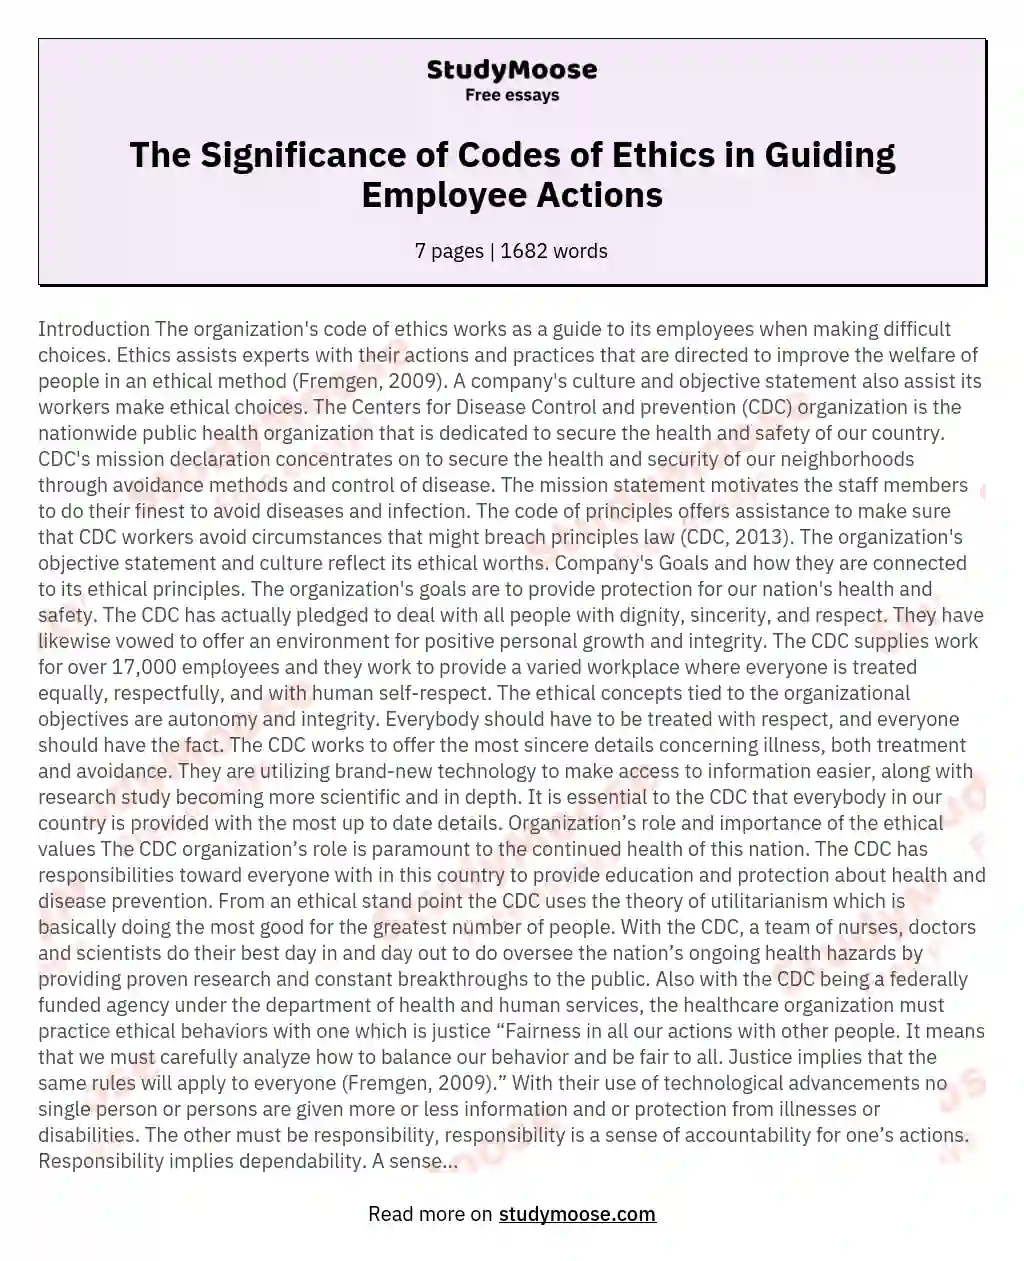 The Significance of Codes of Ethics in Guiding Employee Actions essay